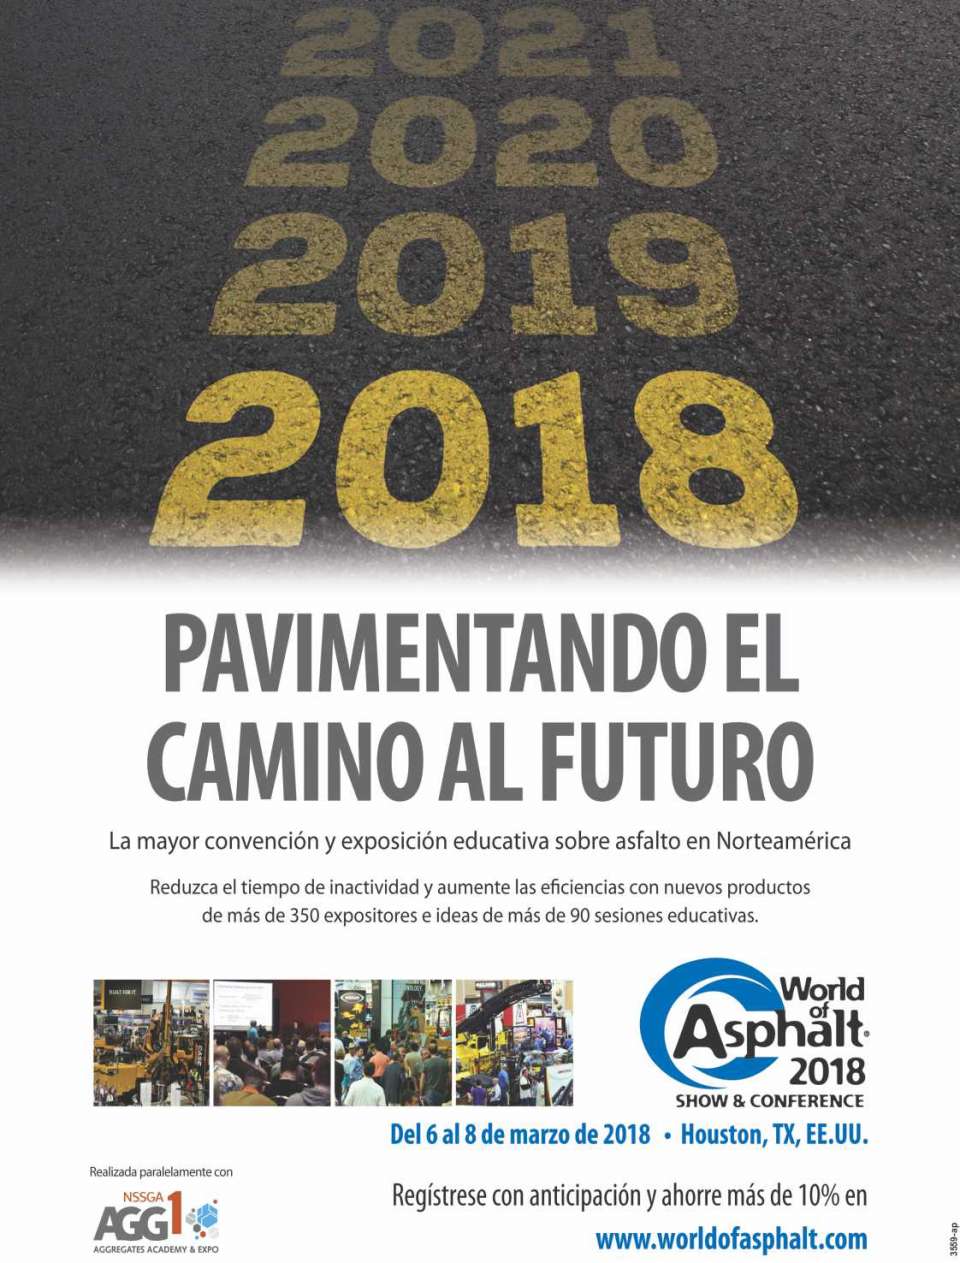 The Largest Asphalt Educational Conference and Fair in North America, March 6-8, 2018 in Houston, Texas.